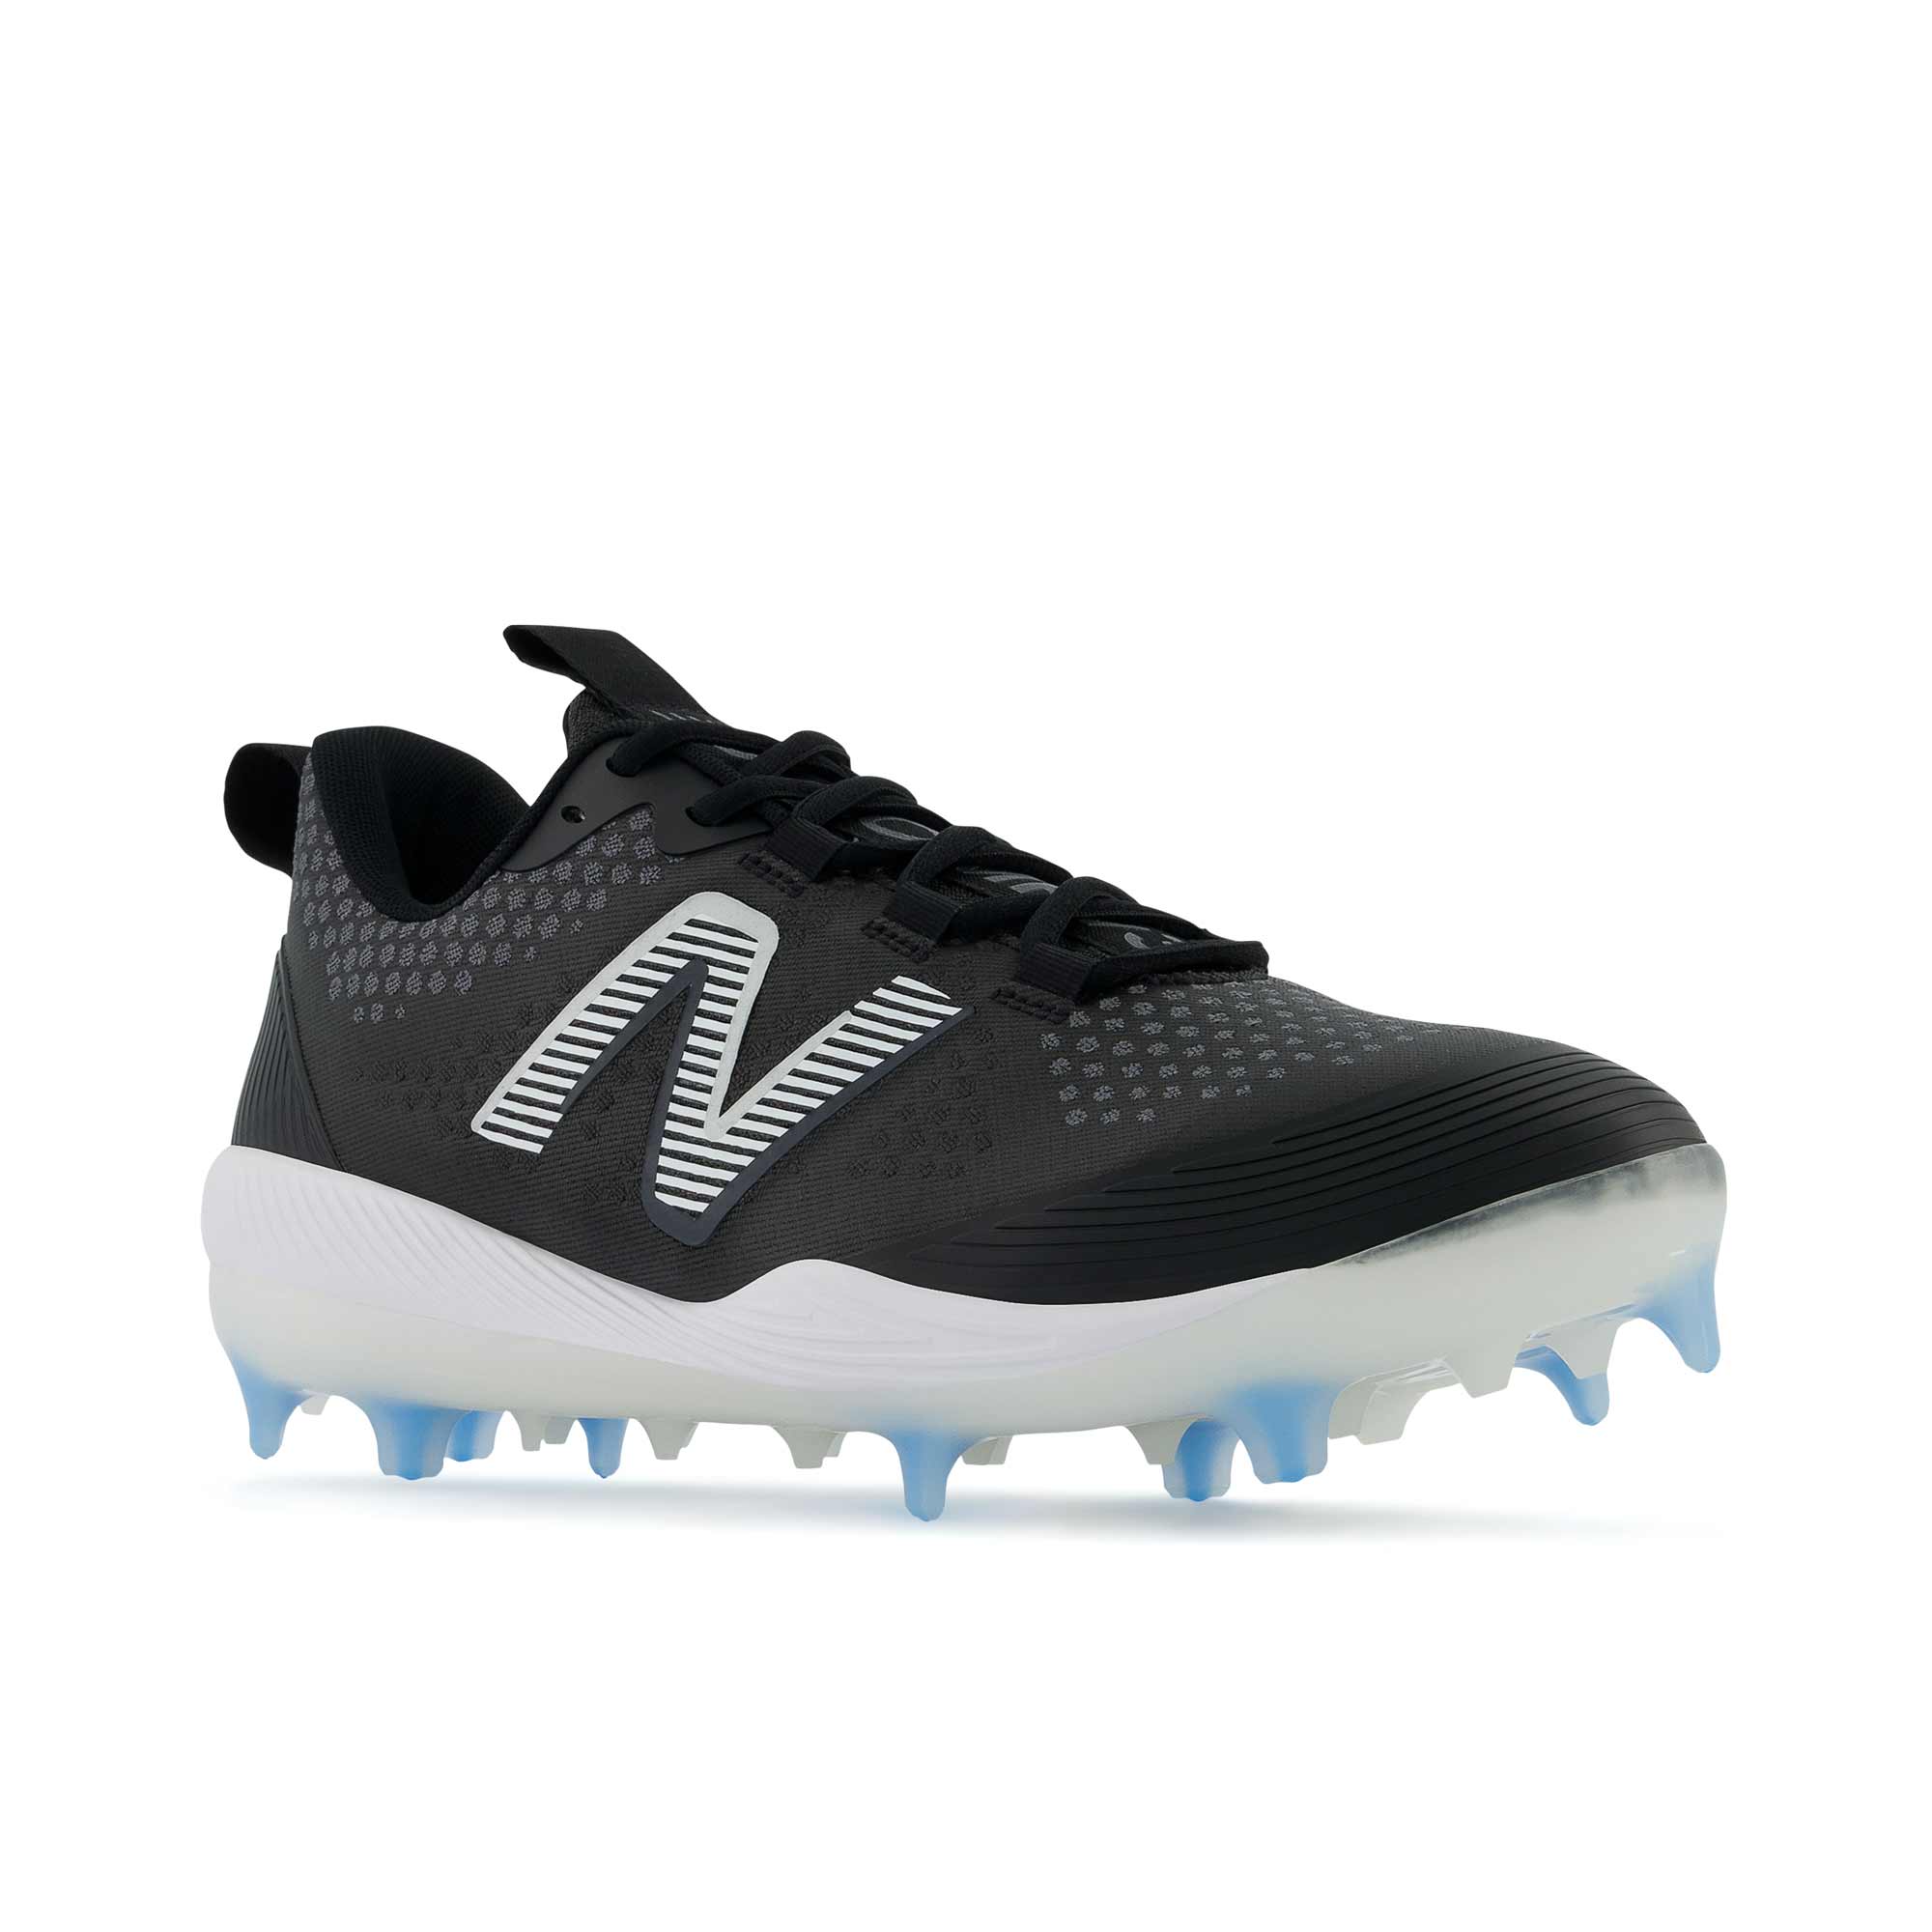 New Balance FuelCell LCOMPv3 Composite Molded Baseball Cleat